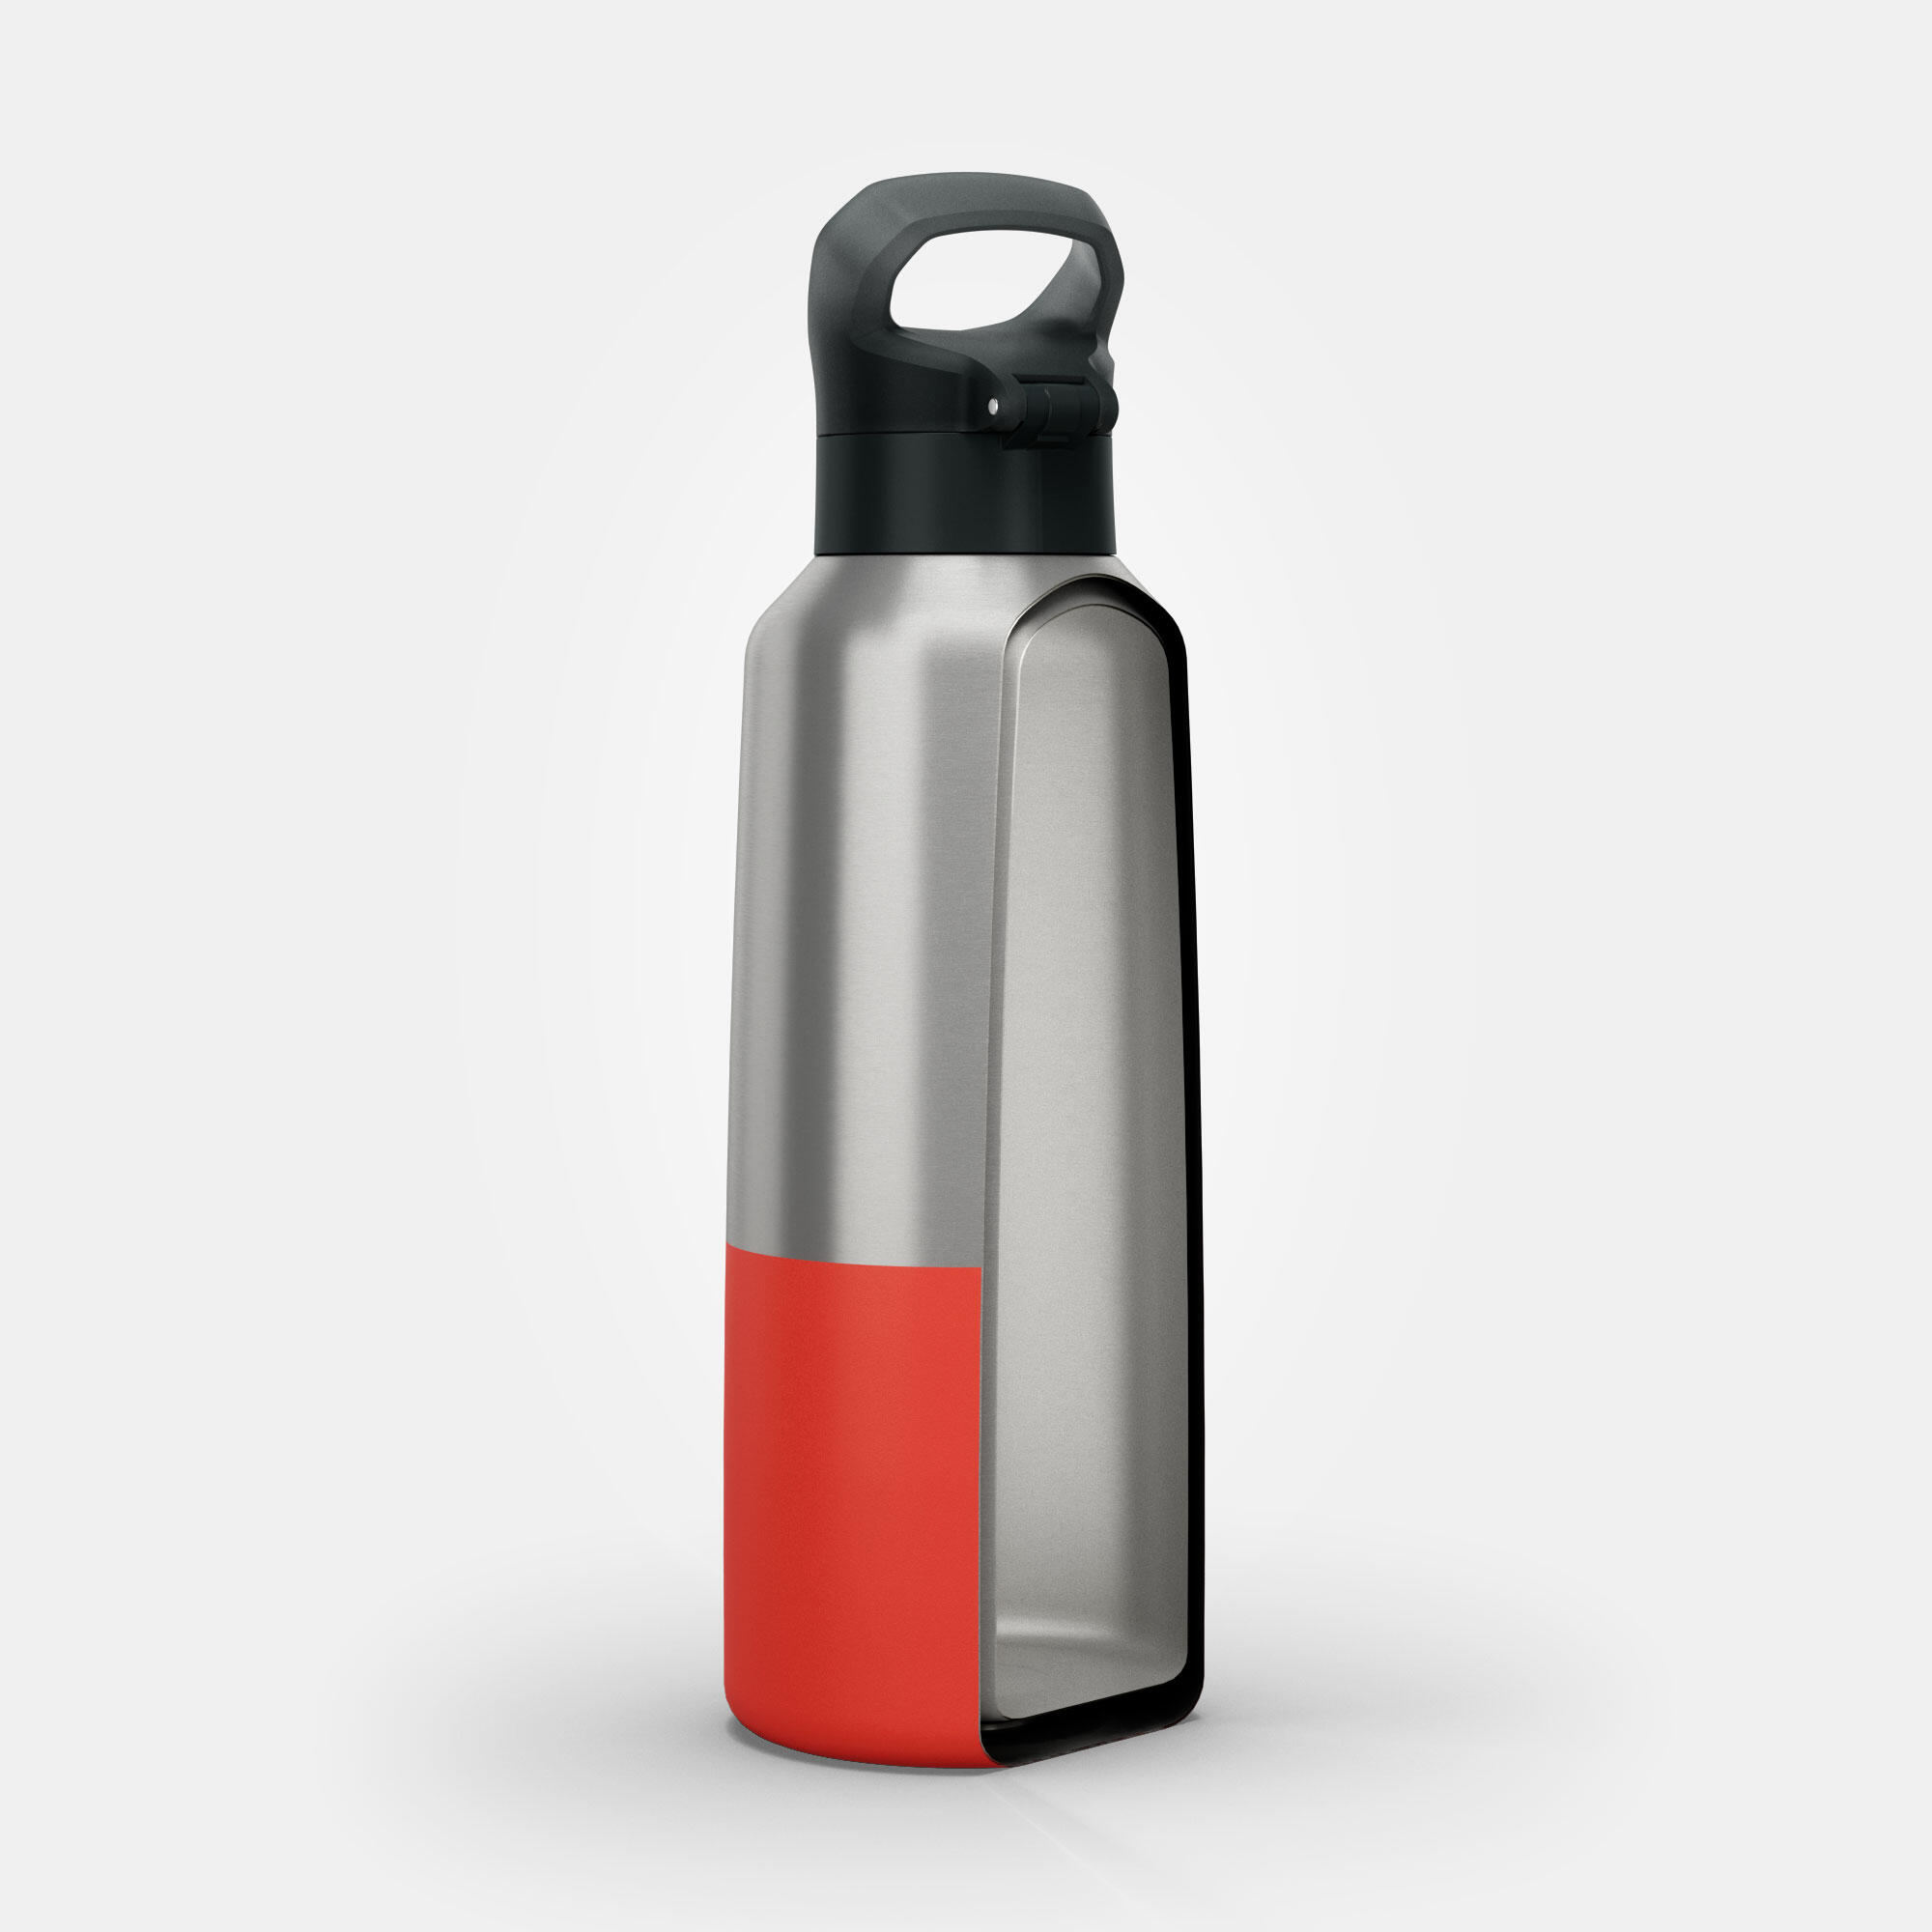 0.8 L stainless steel water bottle with quick-open cap for hiking - Red 17/35